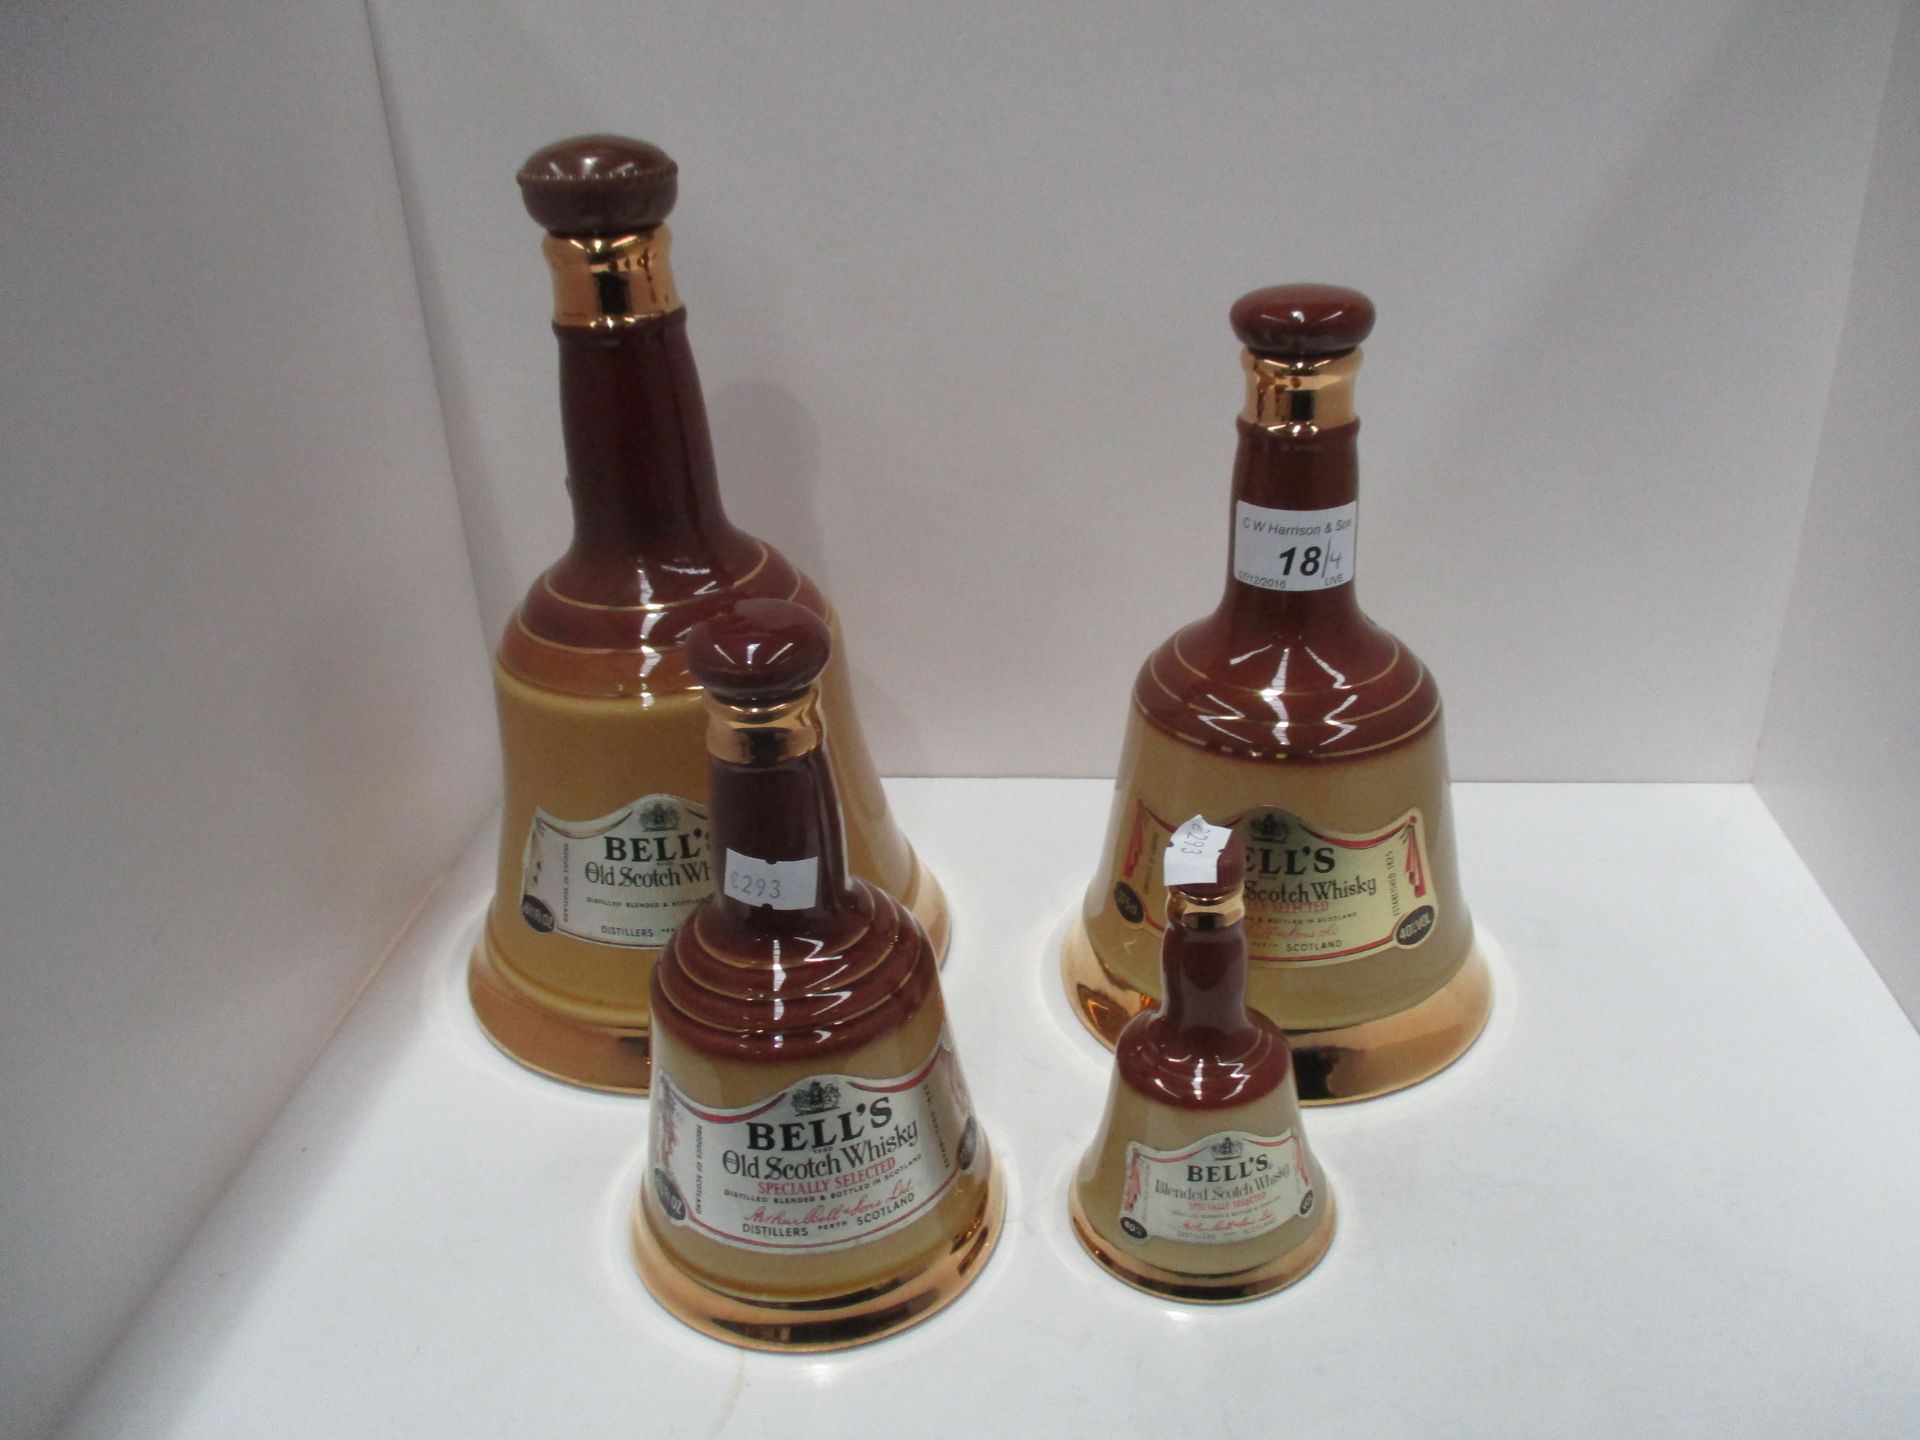 4 x Wade Bell's Scotch Whisky bottles - display only - no contents